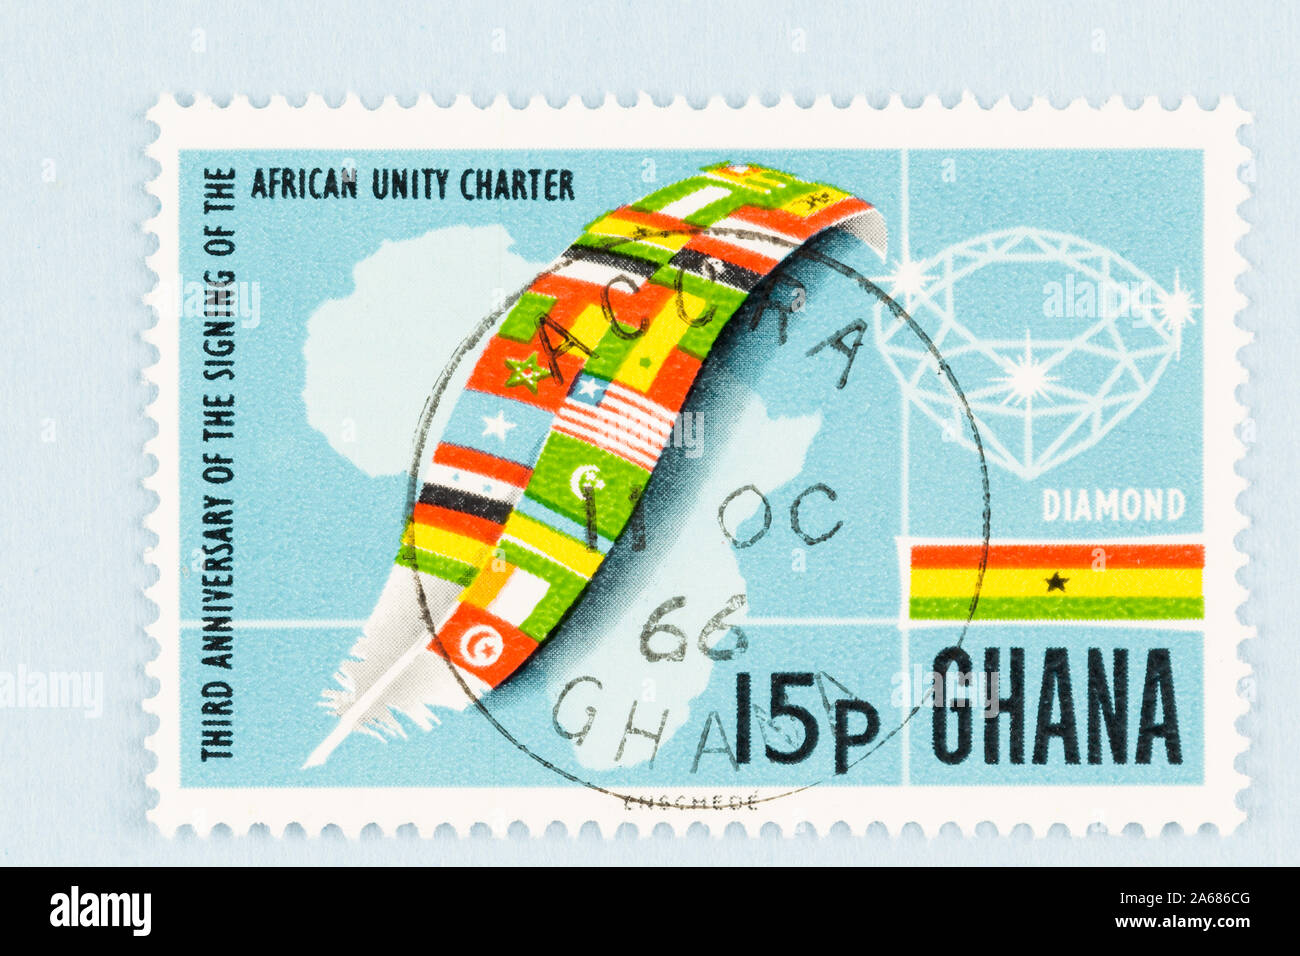 Ghana postage celebrating 3rd anniversary Signing of the African Unity Charter. Stamp with diamond, Africa silhouette and a large feather with flags. Stock Photo